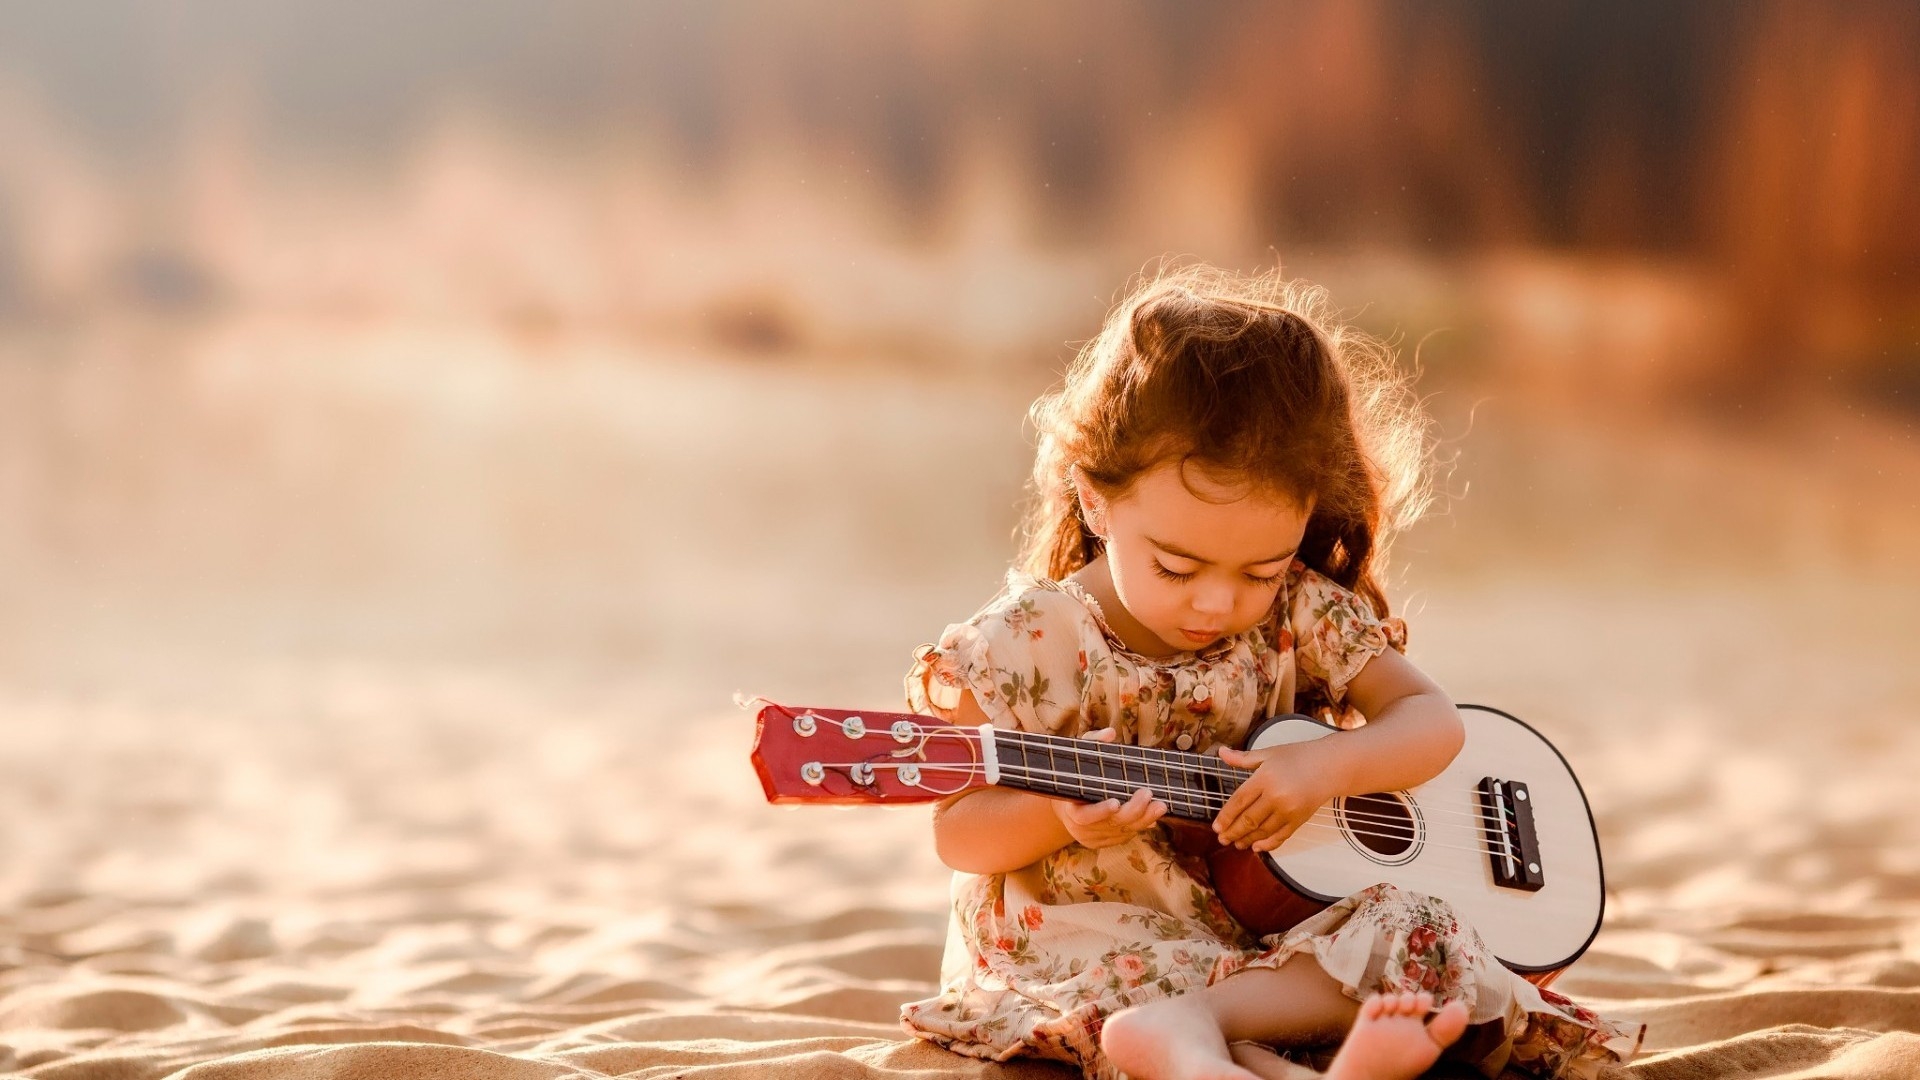 Cute Little Girl Playing Guitar for 1920 x 1080 HDTV 1080p resolution